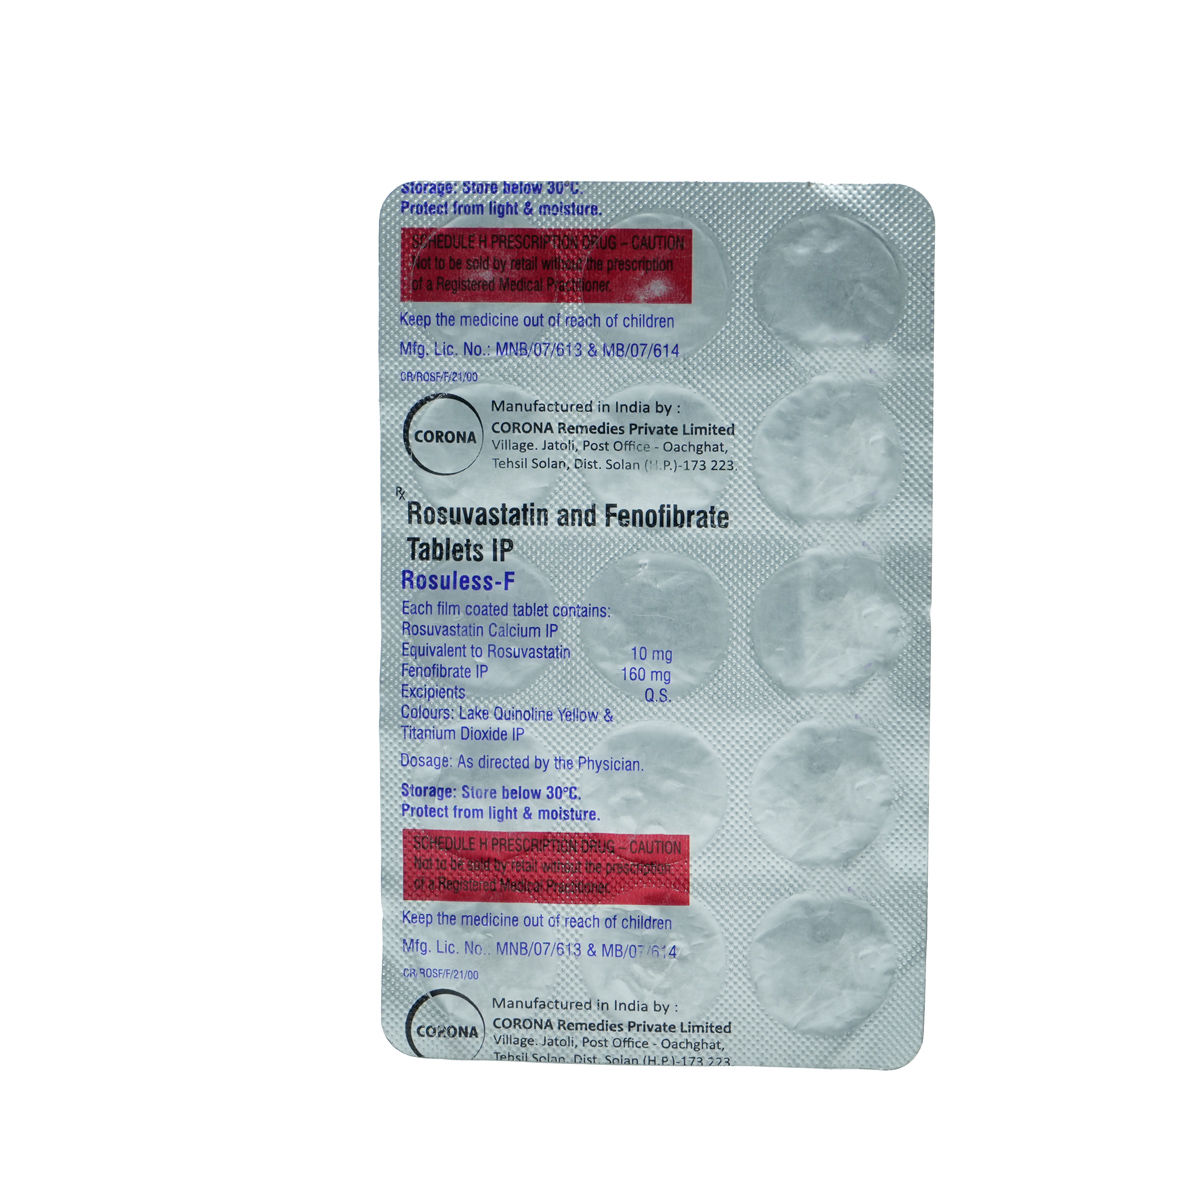 Rosuless-F 10/160 Tablet 15's Price, Uses, Side Effects ...